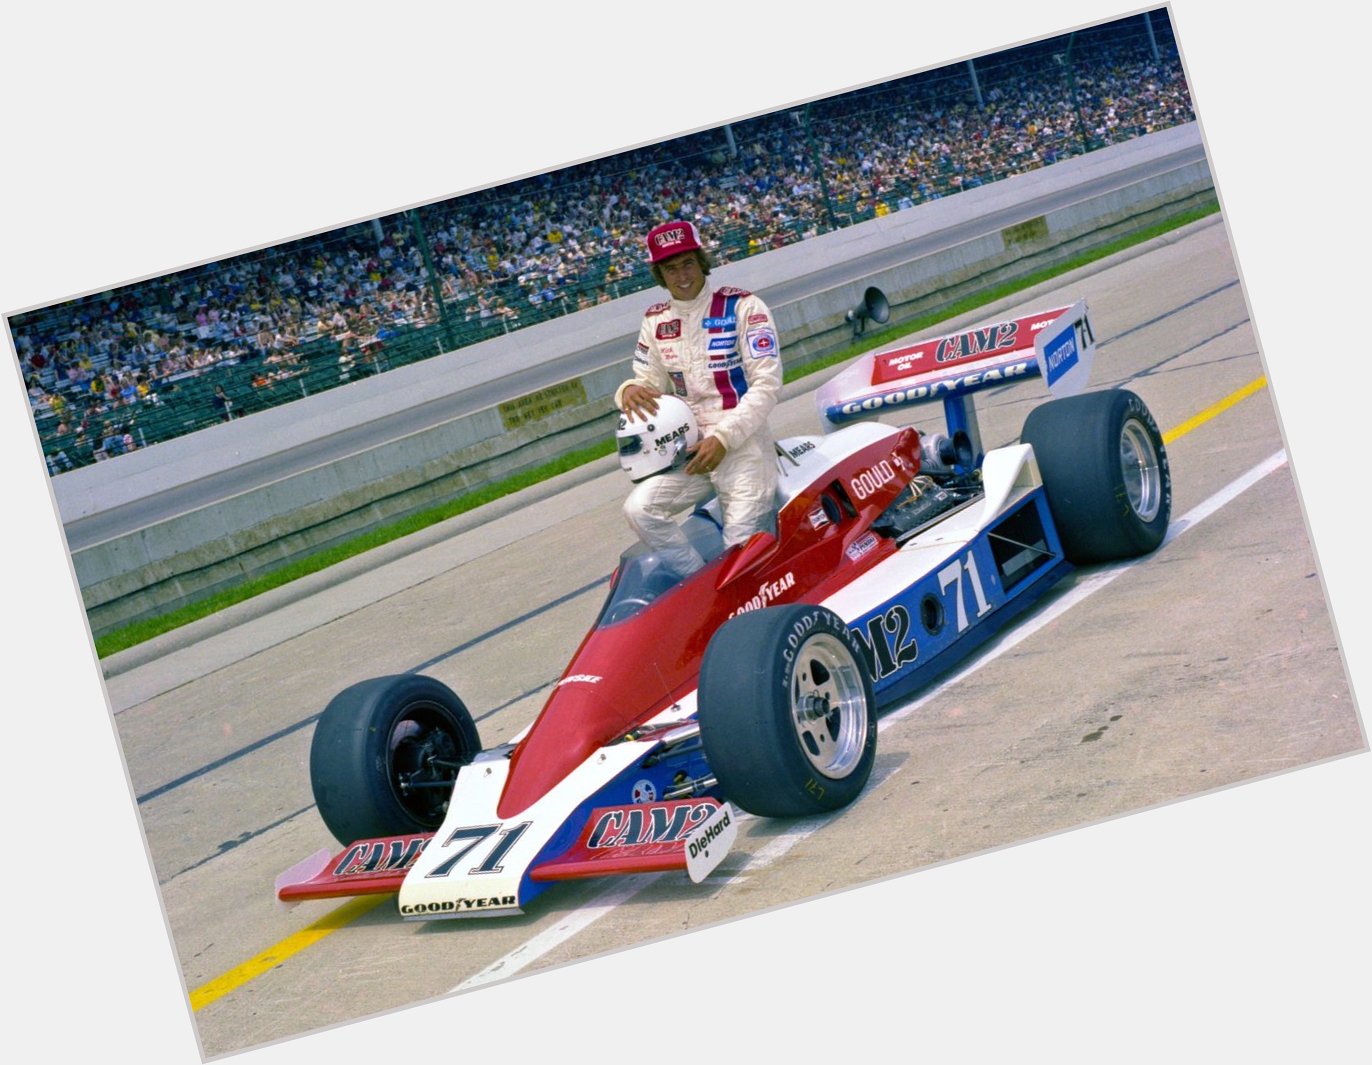 Still one of my all-time favourites. Happy birthday to the great Rick Mears.  